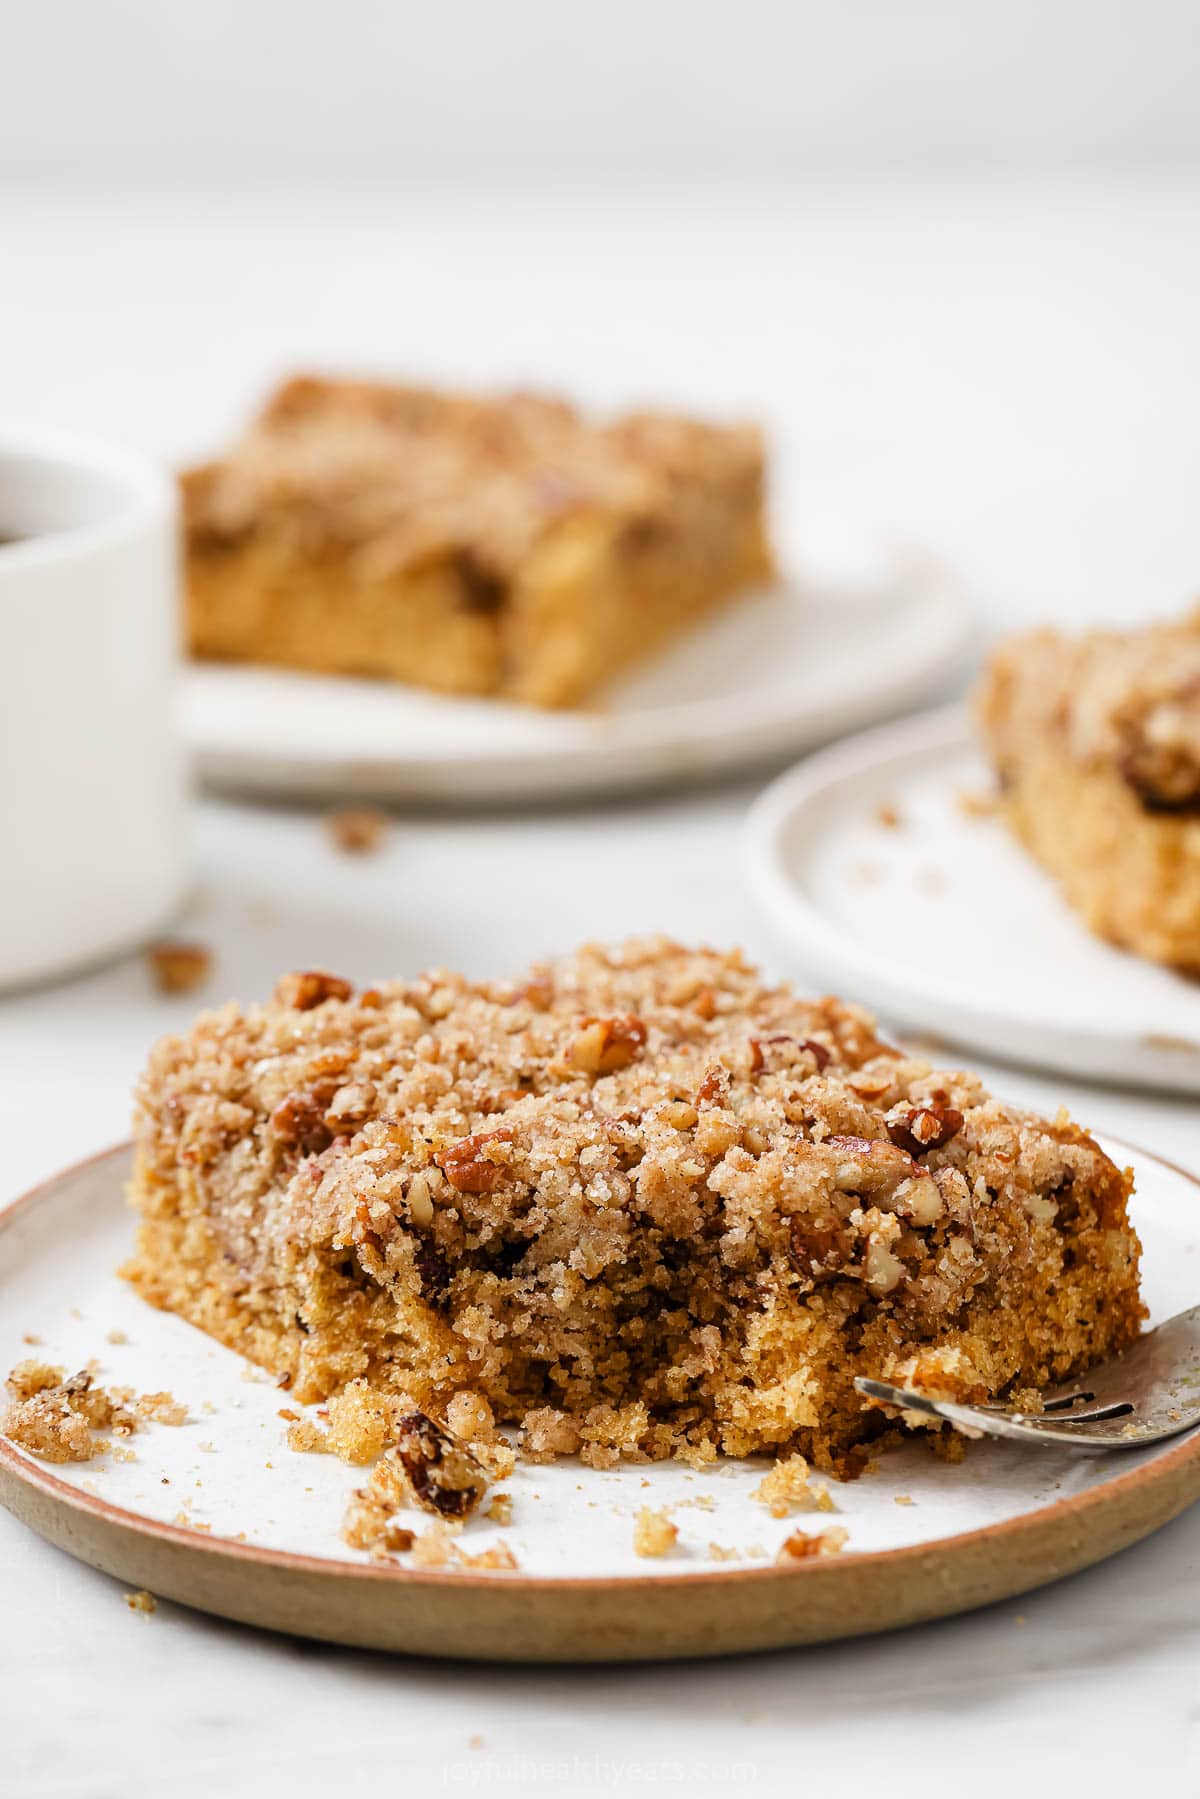 Slice of coffee cake with pecan-streusel topping.